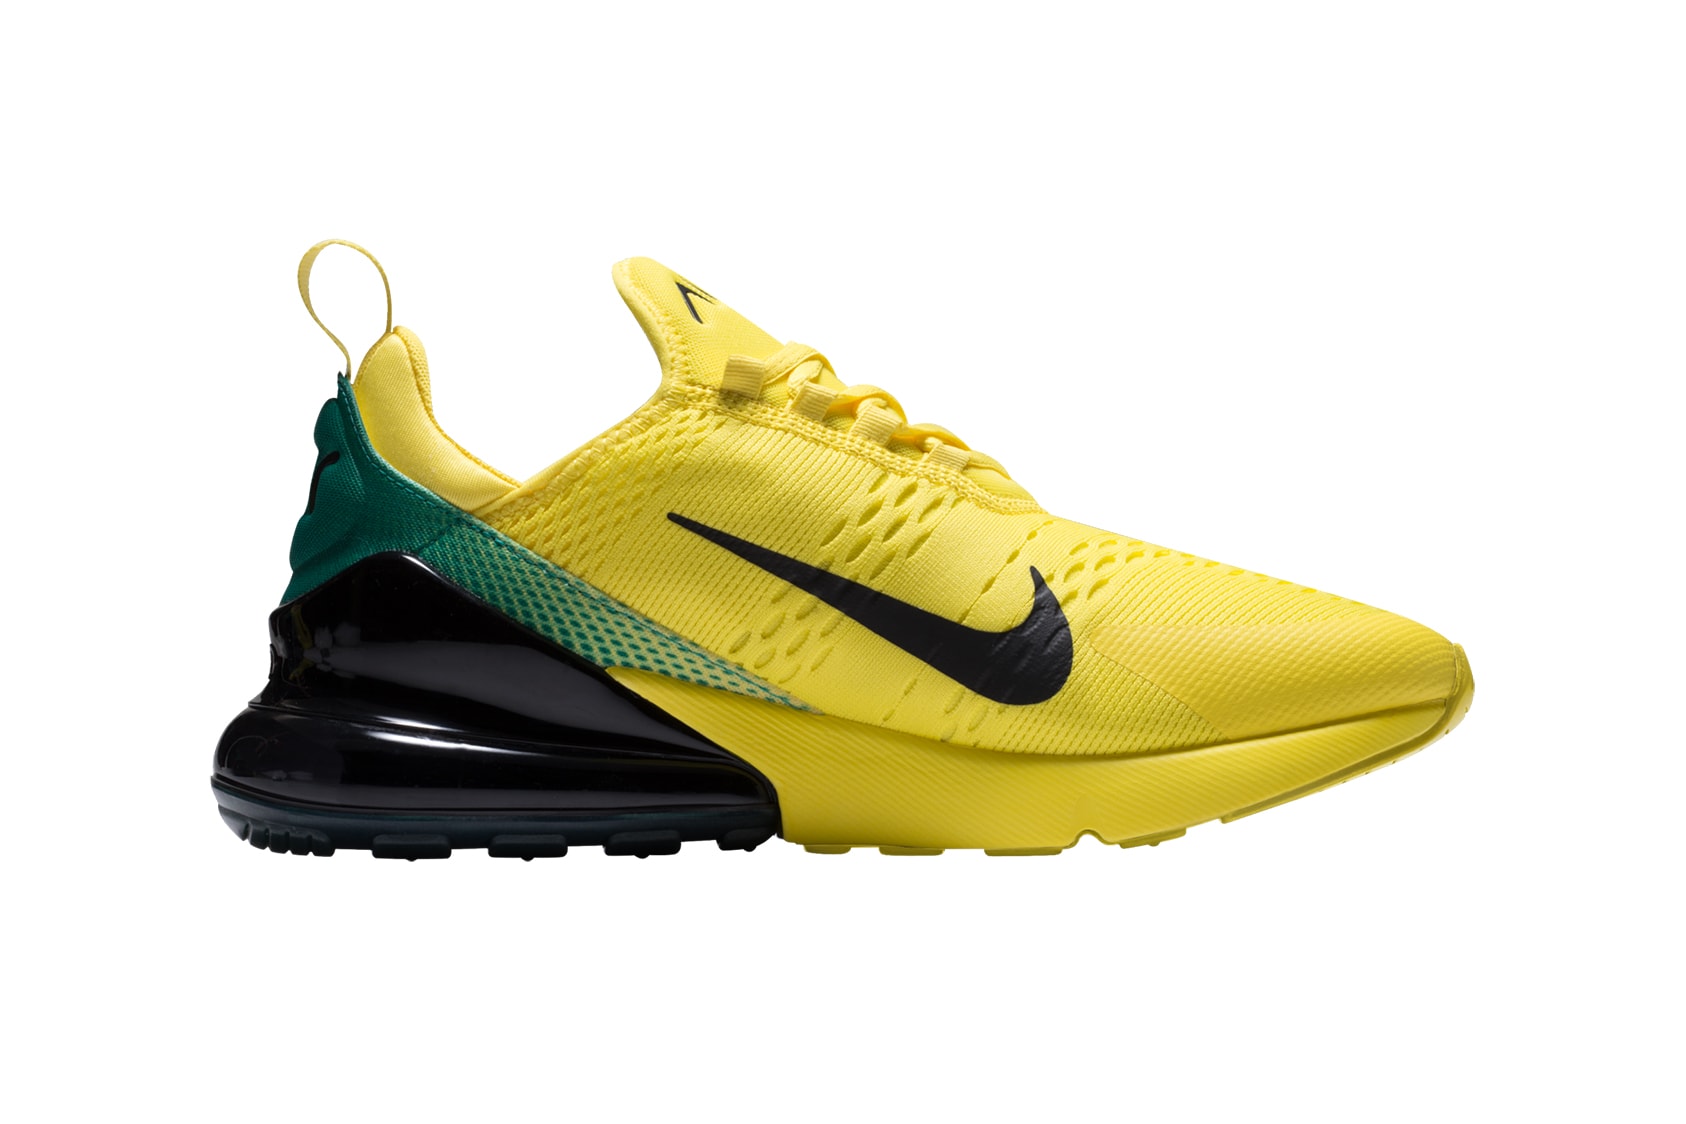 Nike Mercurial Air Max 270 Colorways Vapor Superfly Cristiano Ronaldo Football Boots Cleats Soccer Purple Orange Grey Volt Green 1998 World Cup Kim Jones Virgil Abloh Release Information Details How to Buy Cop Purchase